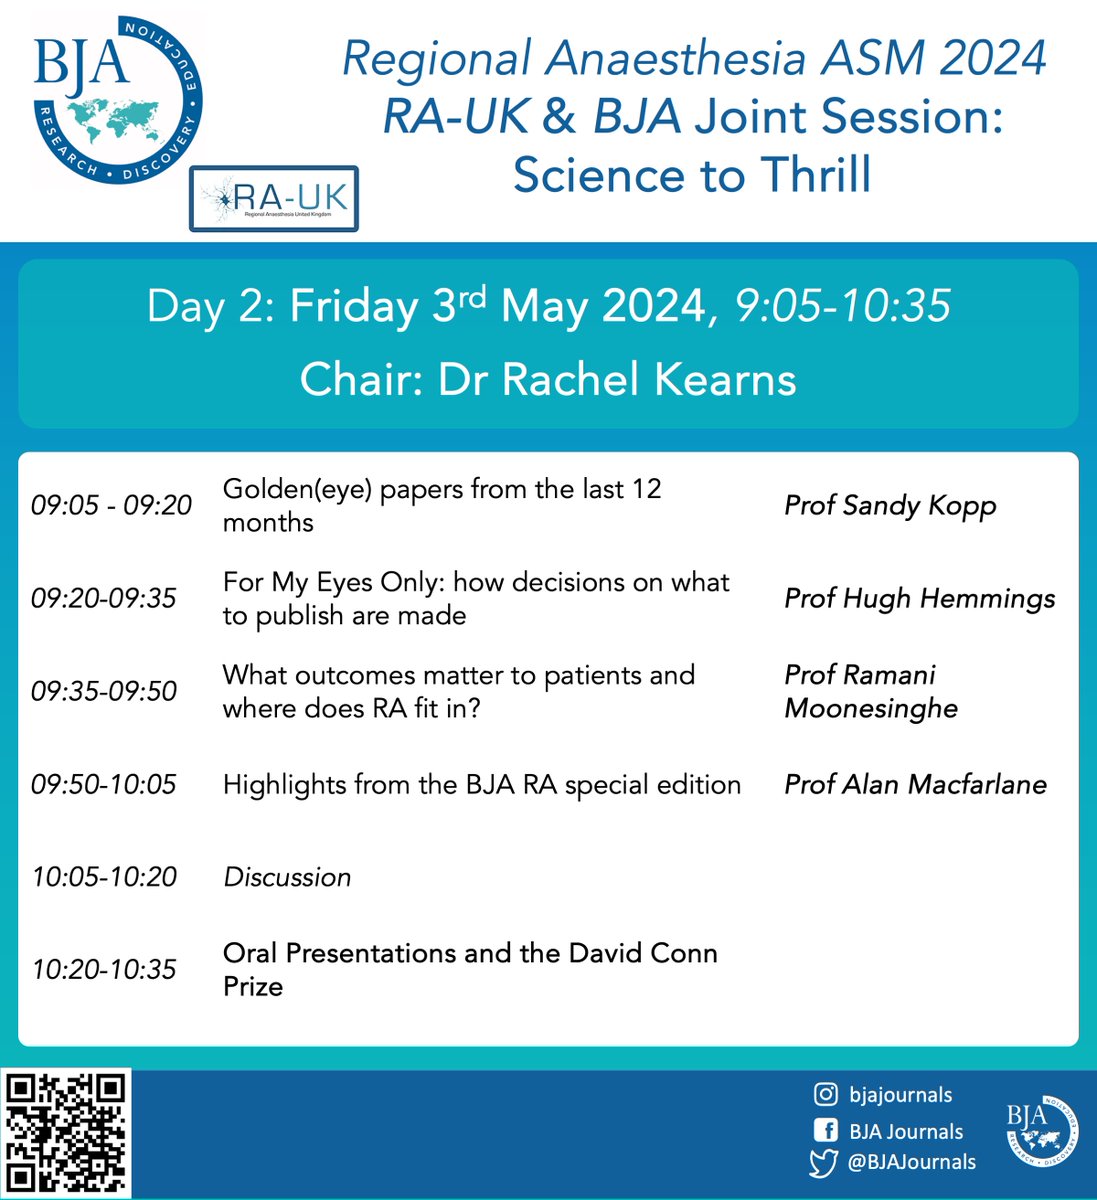 Are you attending #RAUK24. Check out our #BJA session tomorrow, chaired by Dr Rachel Kearns #regionalanaesthesia #specialissue